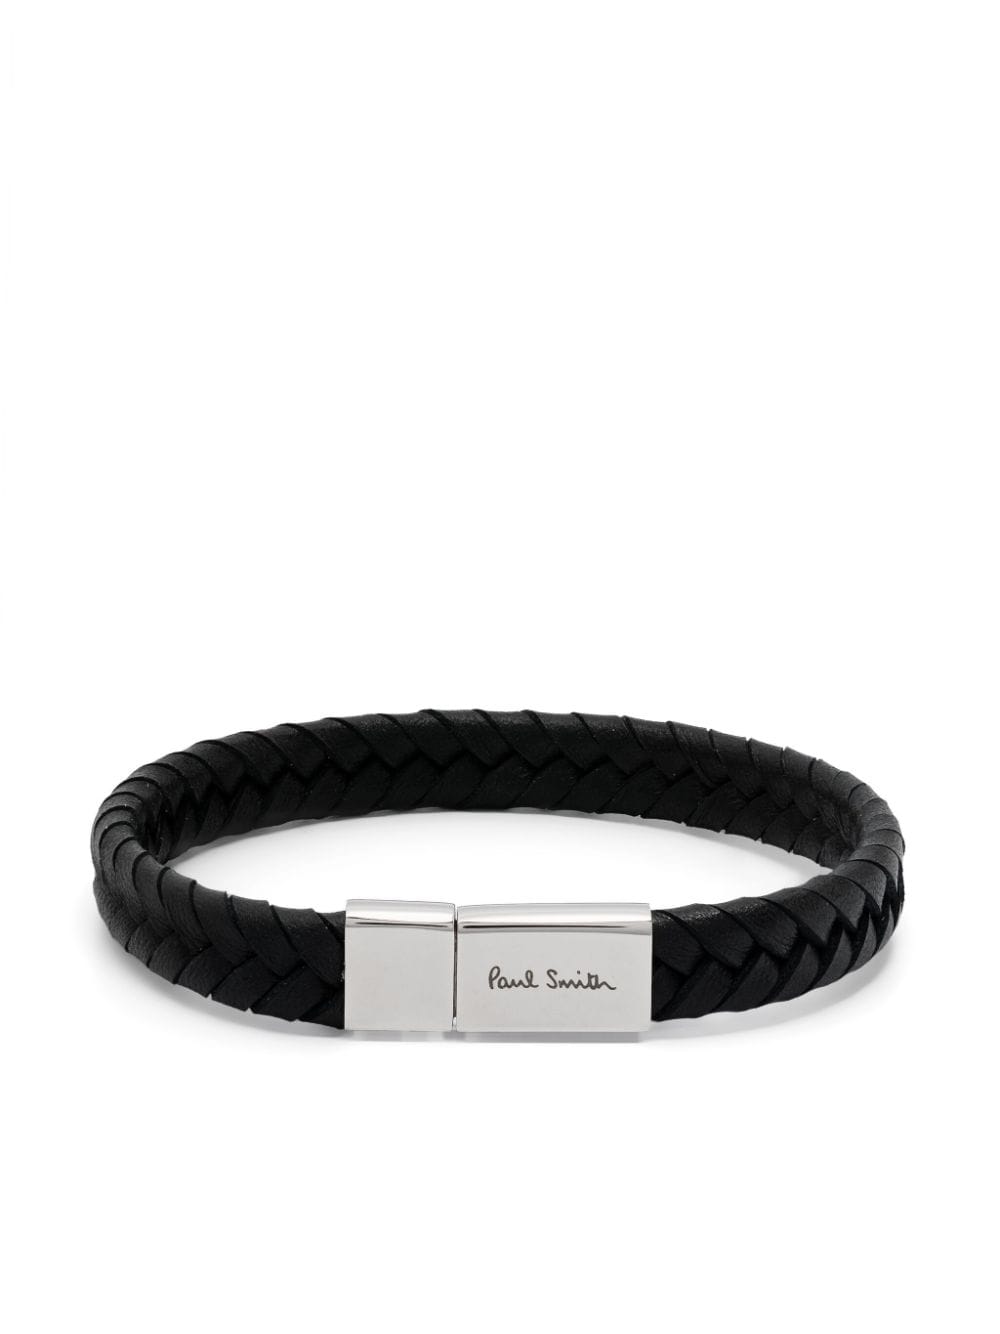 Paul Smith Braided Leather Bracelet In Silver